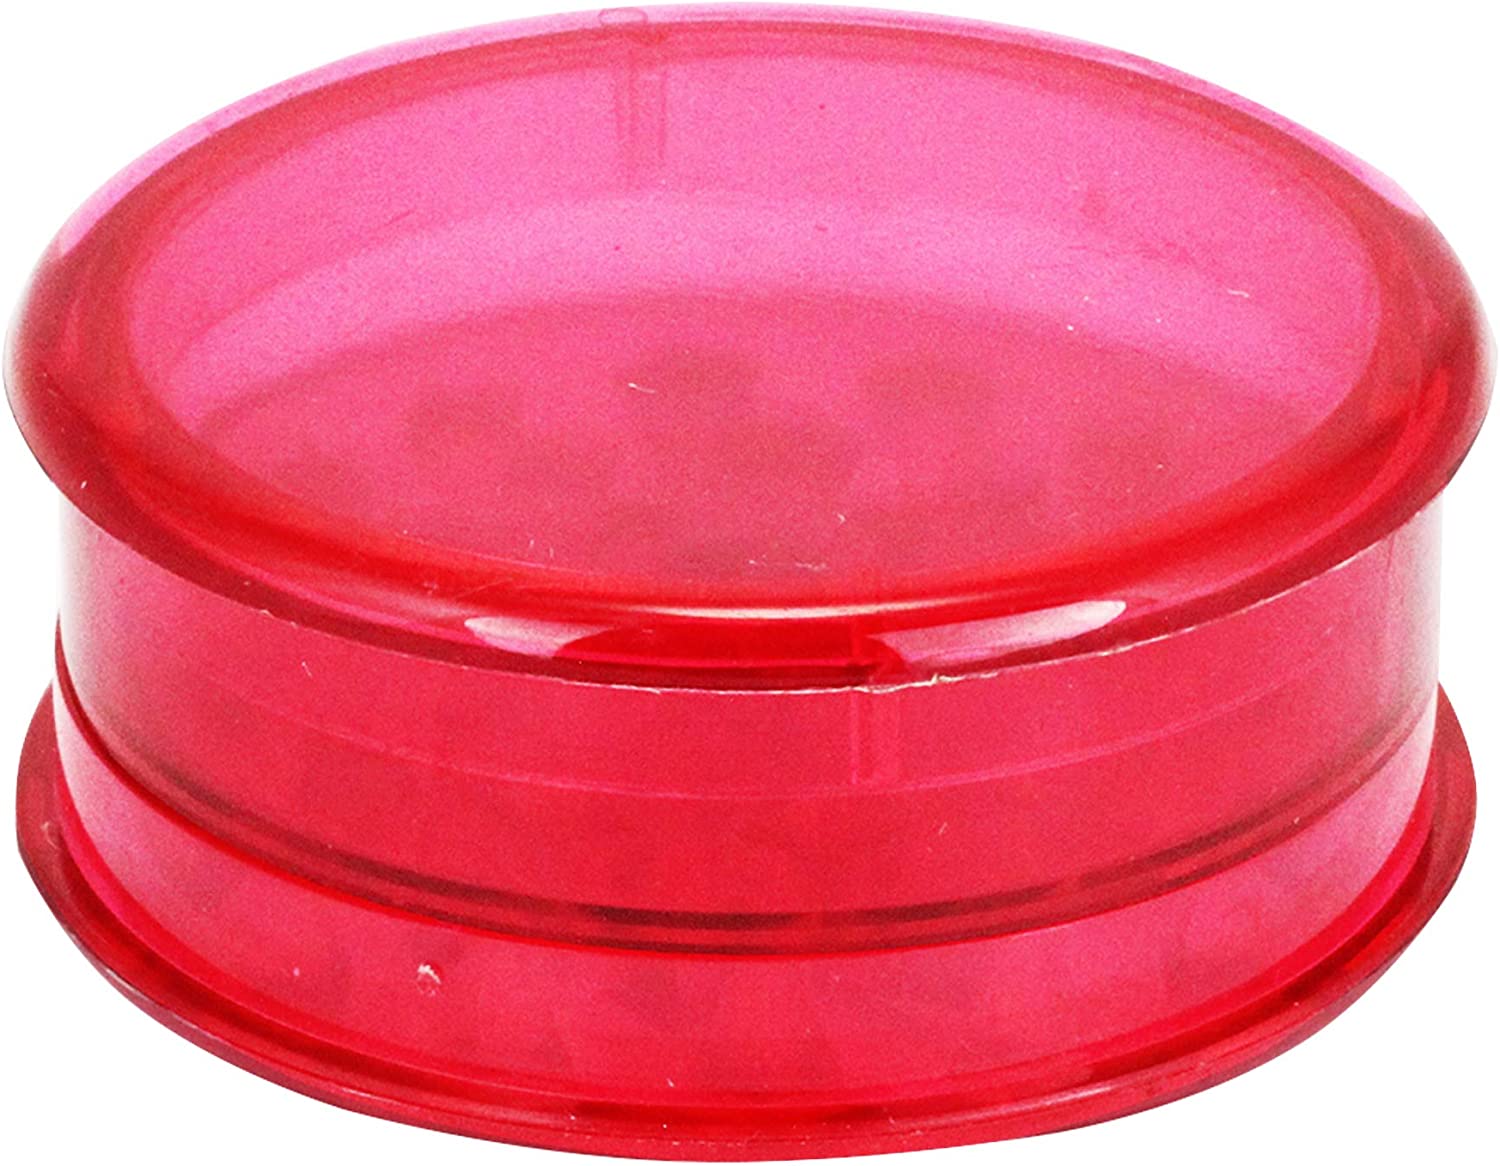 Spliff Plastic Grinder 60 mm Three Parts Including Storage Choose Your Favourite Colour (Red)